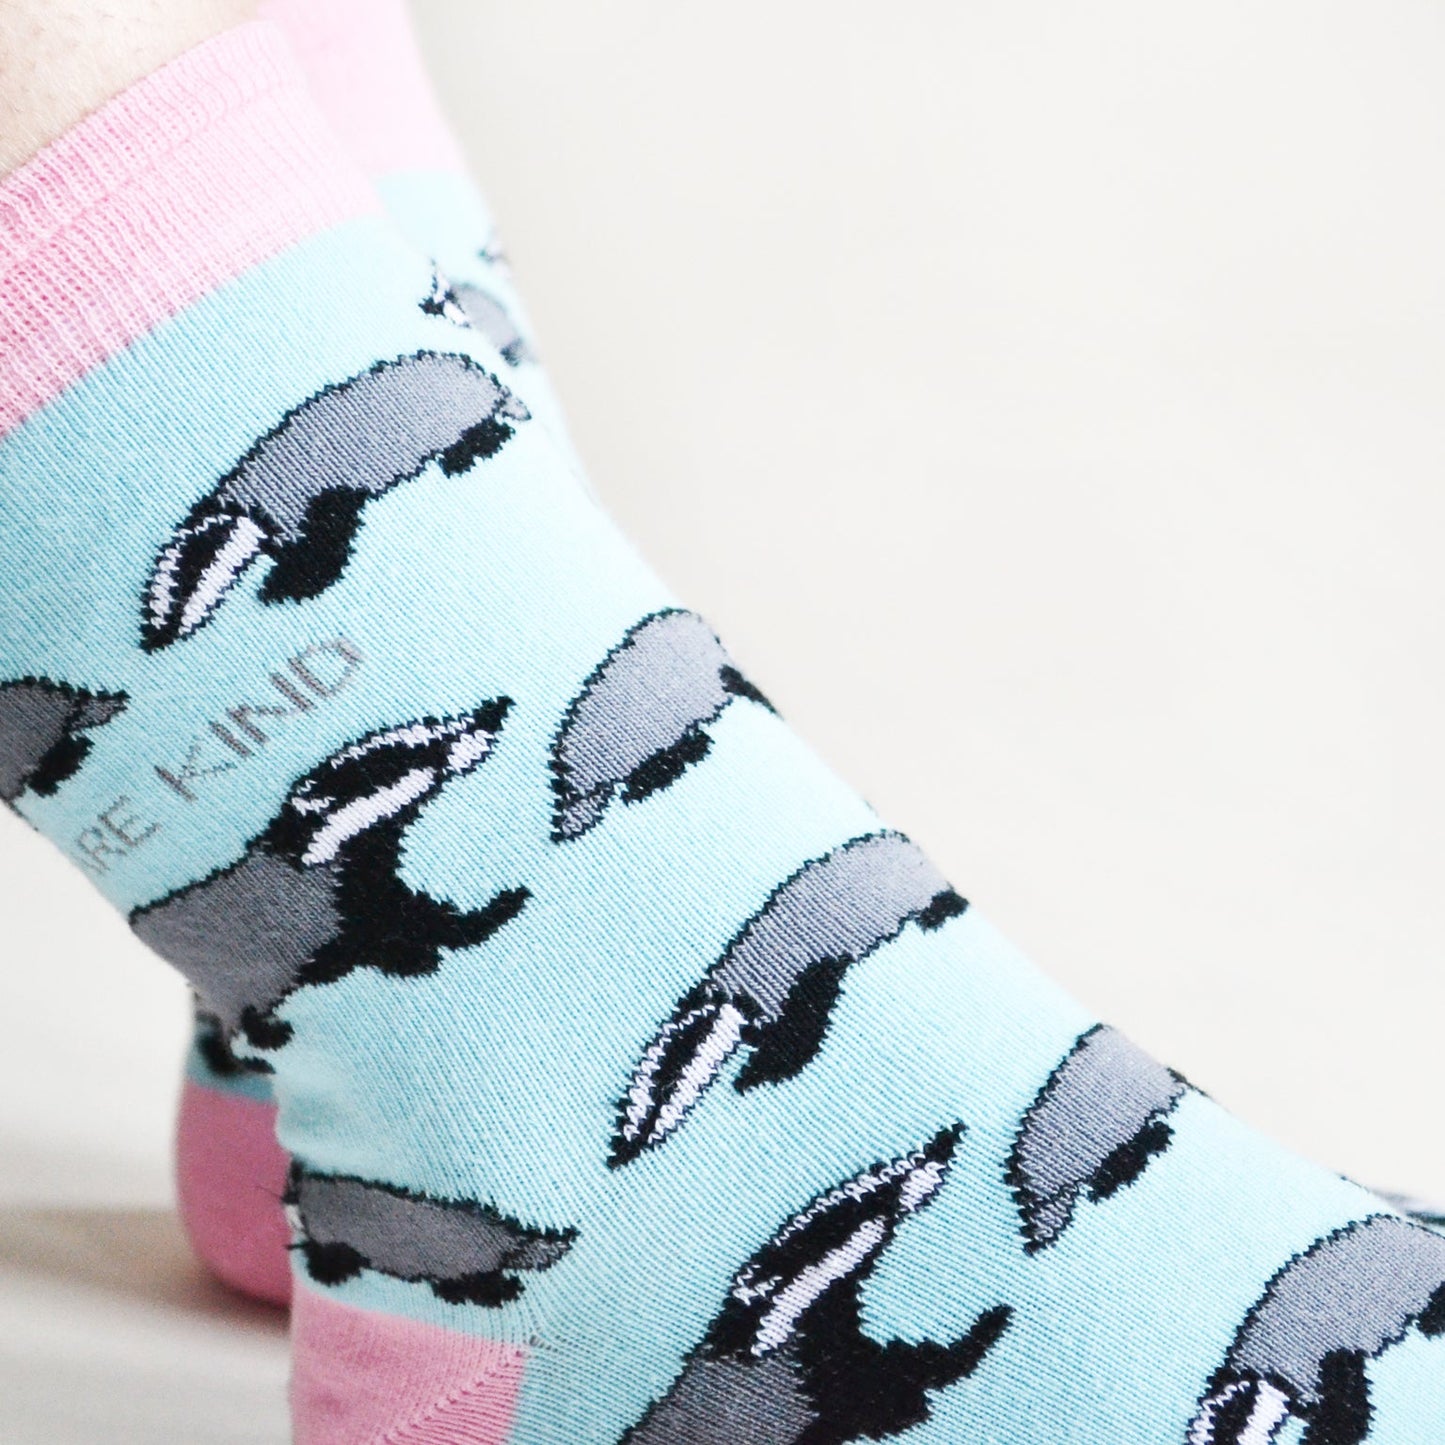 Bare Kind Bamboo Socks - Save the Badgers (blue & pink)